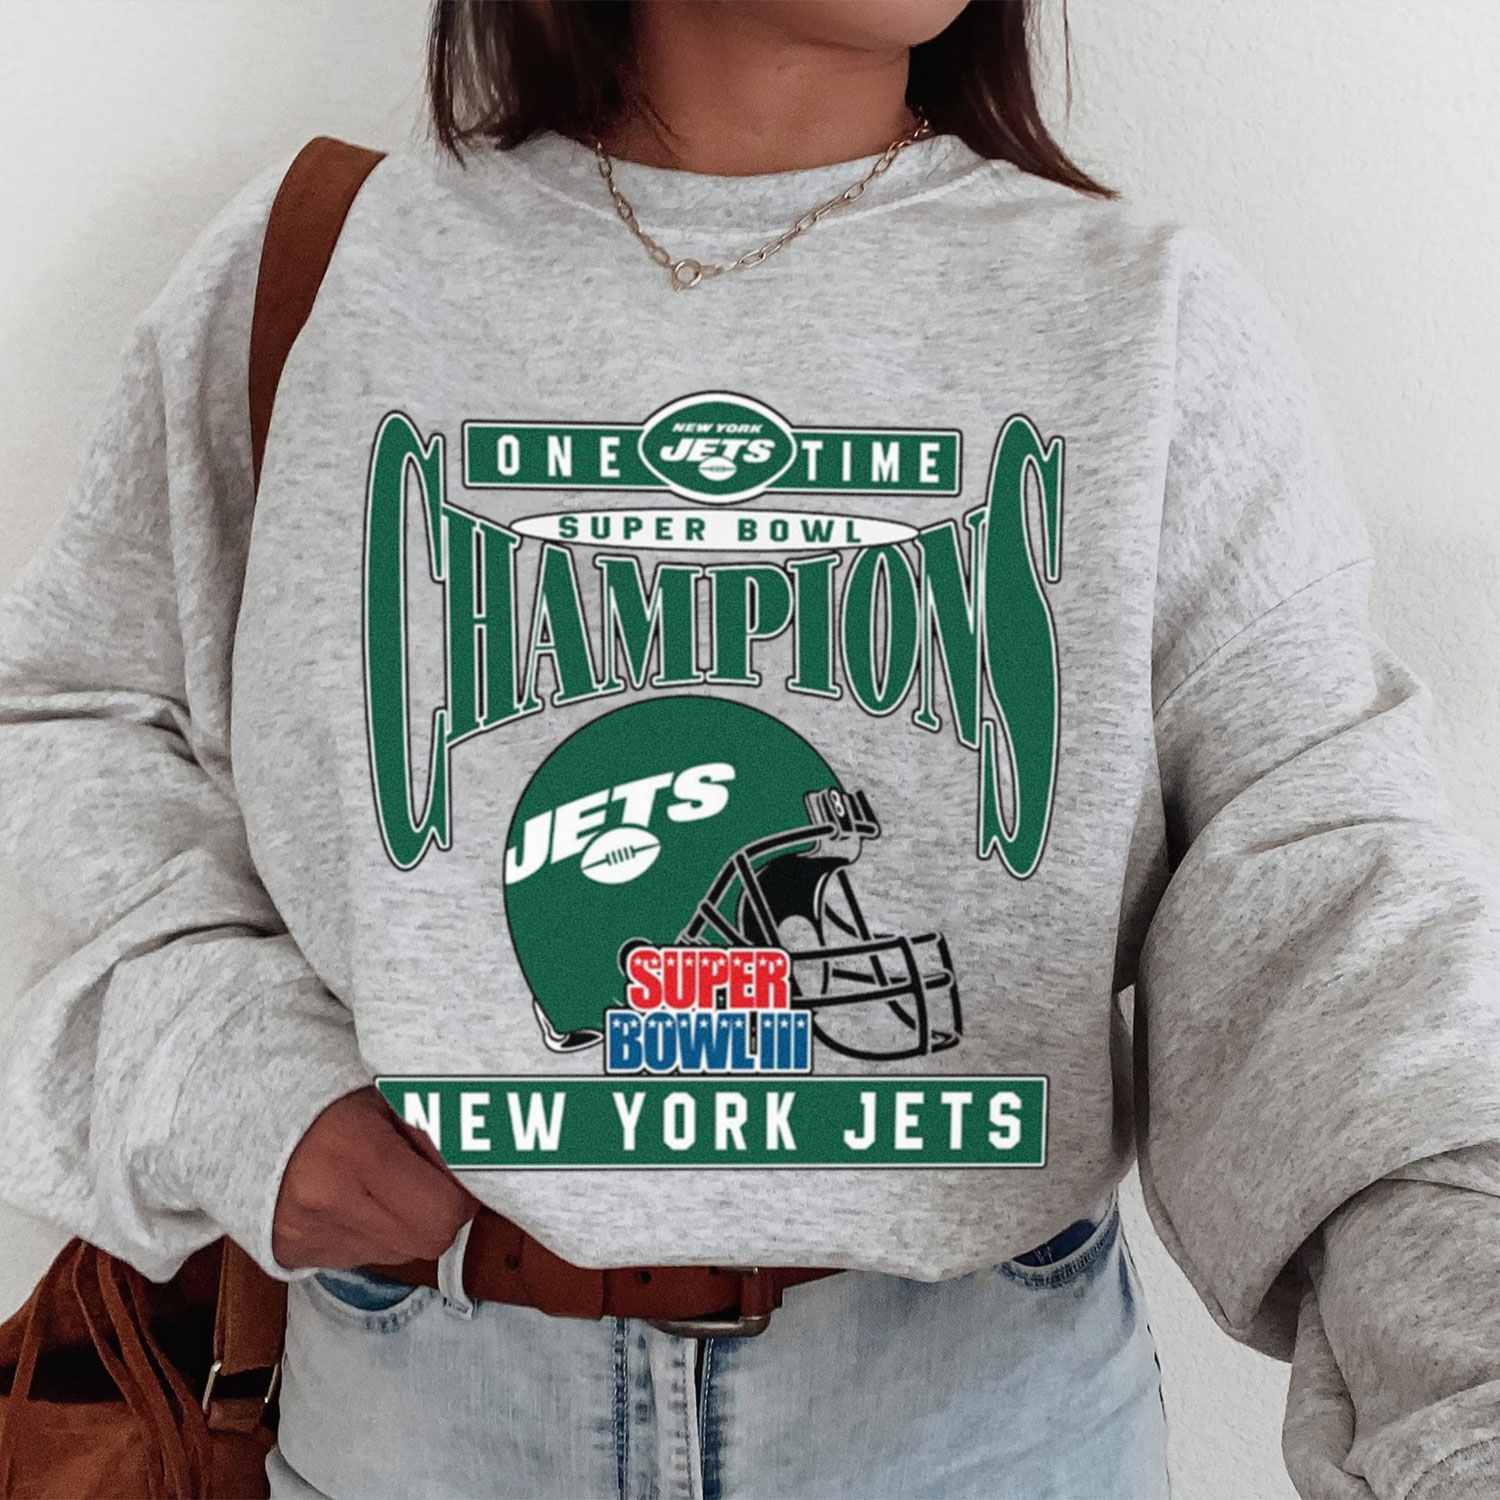 One Time Super Bowl Champions New York Jets T-Shirt